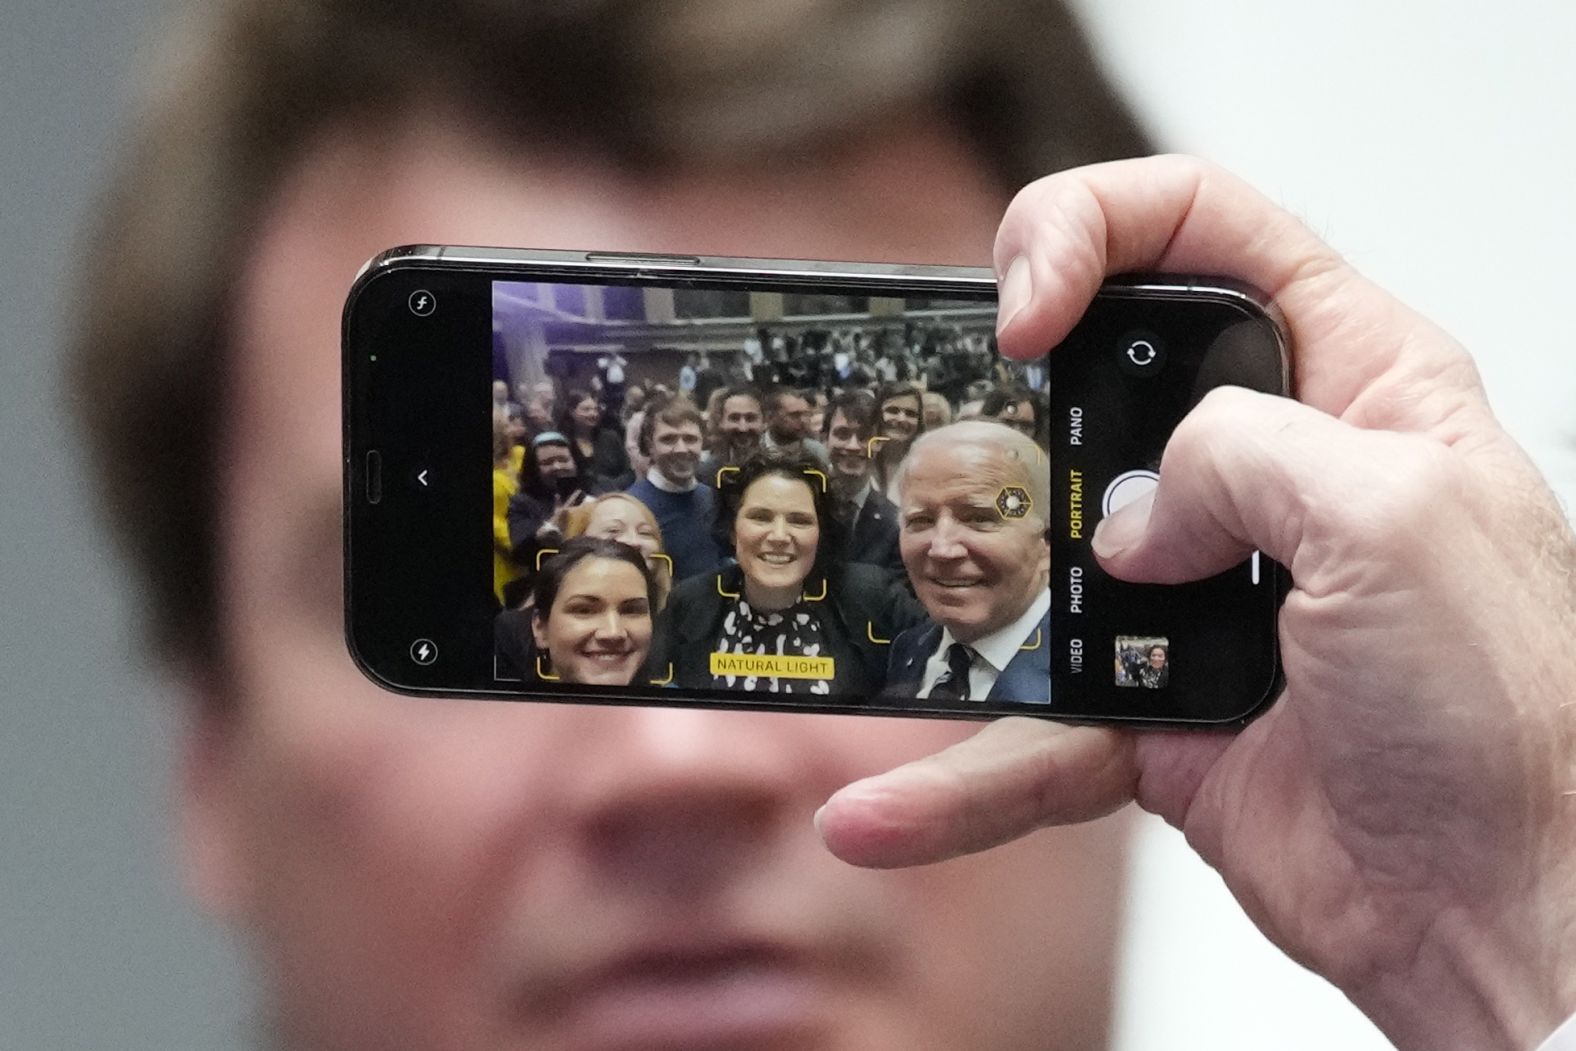 US President Joe Biden takes a selfie with audience members after speaking at the Ulster University's new campus in Belfast, Northern Ireland, on Wednesday, April 12. Biden left Washington, DC, on Tuesday for a <a href="https://www.cnn.com/2023/04/12/politics/biden-northern-ireland-visit-security-breach-intl-hnk/index.html" target="_blank">four-day visit</a> to Northern Ireland, which is part of the United Kingdom, and the Republic of Ireland.